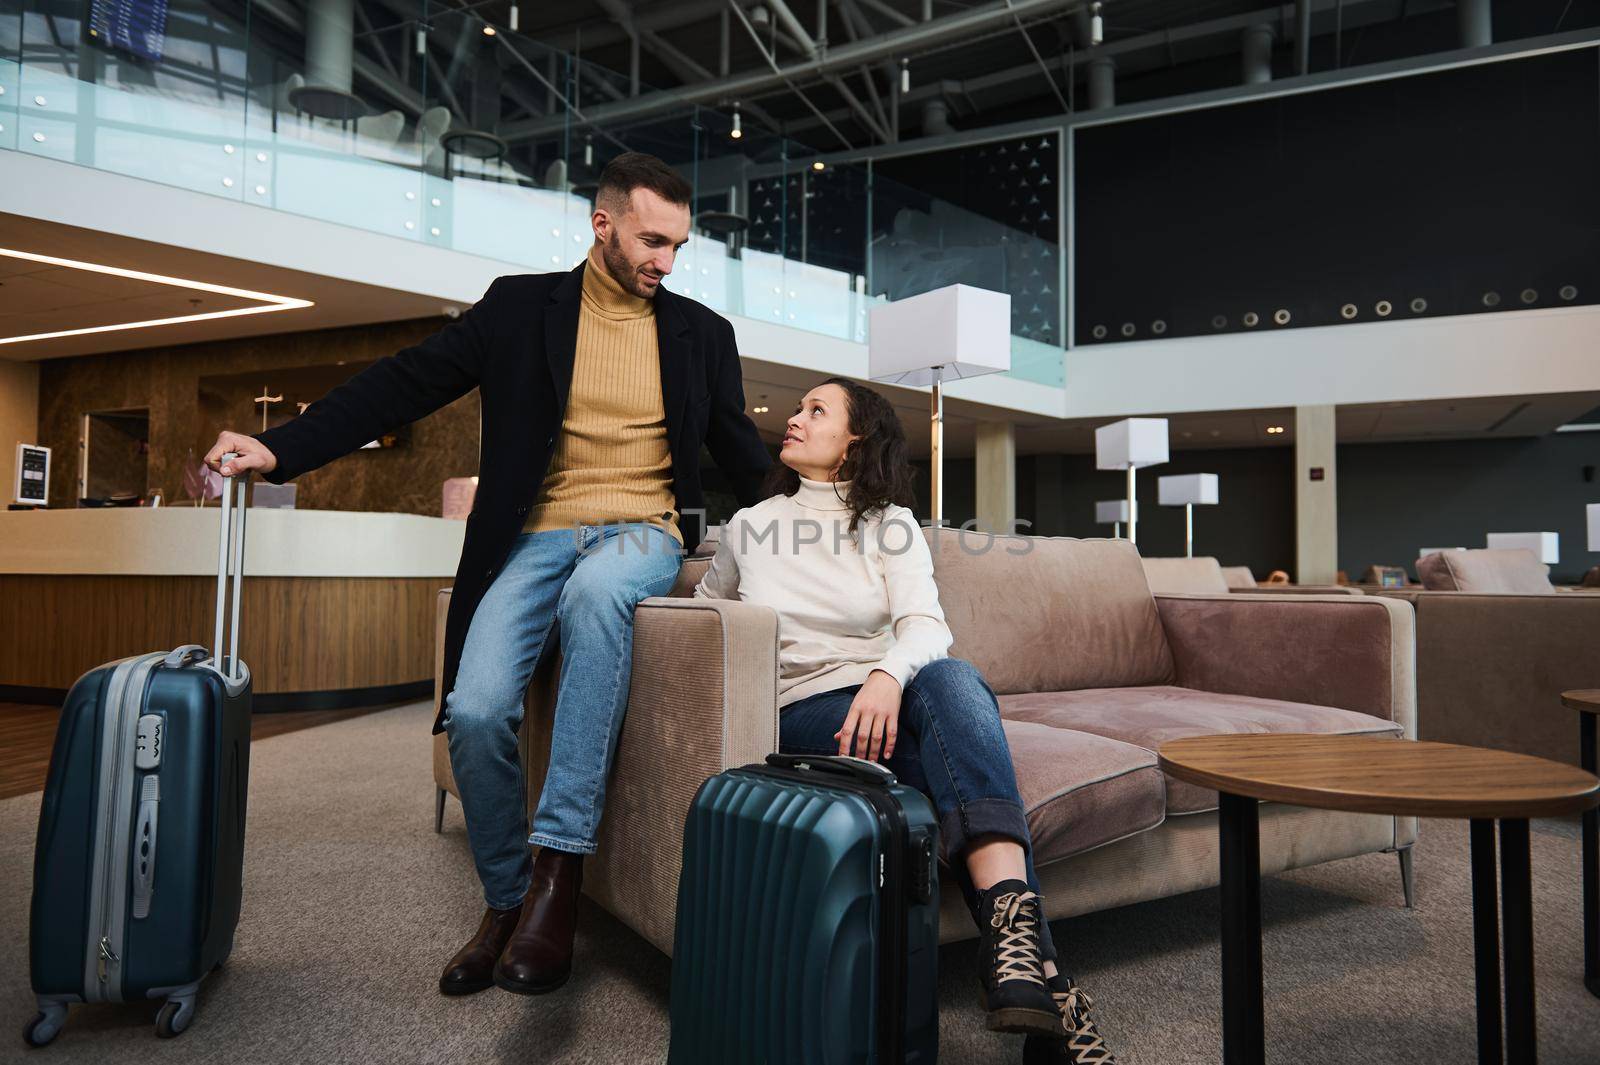 Charming young couple in love, married heterosexual couple, business partners, travelers, passengers with suitcase relaxing in the VIP lounge, waiting for flight check-in at international airport